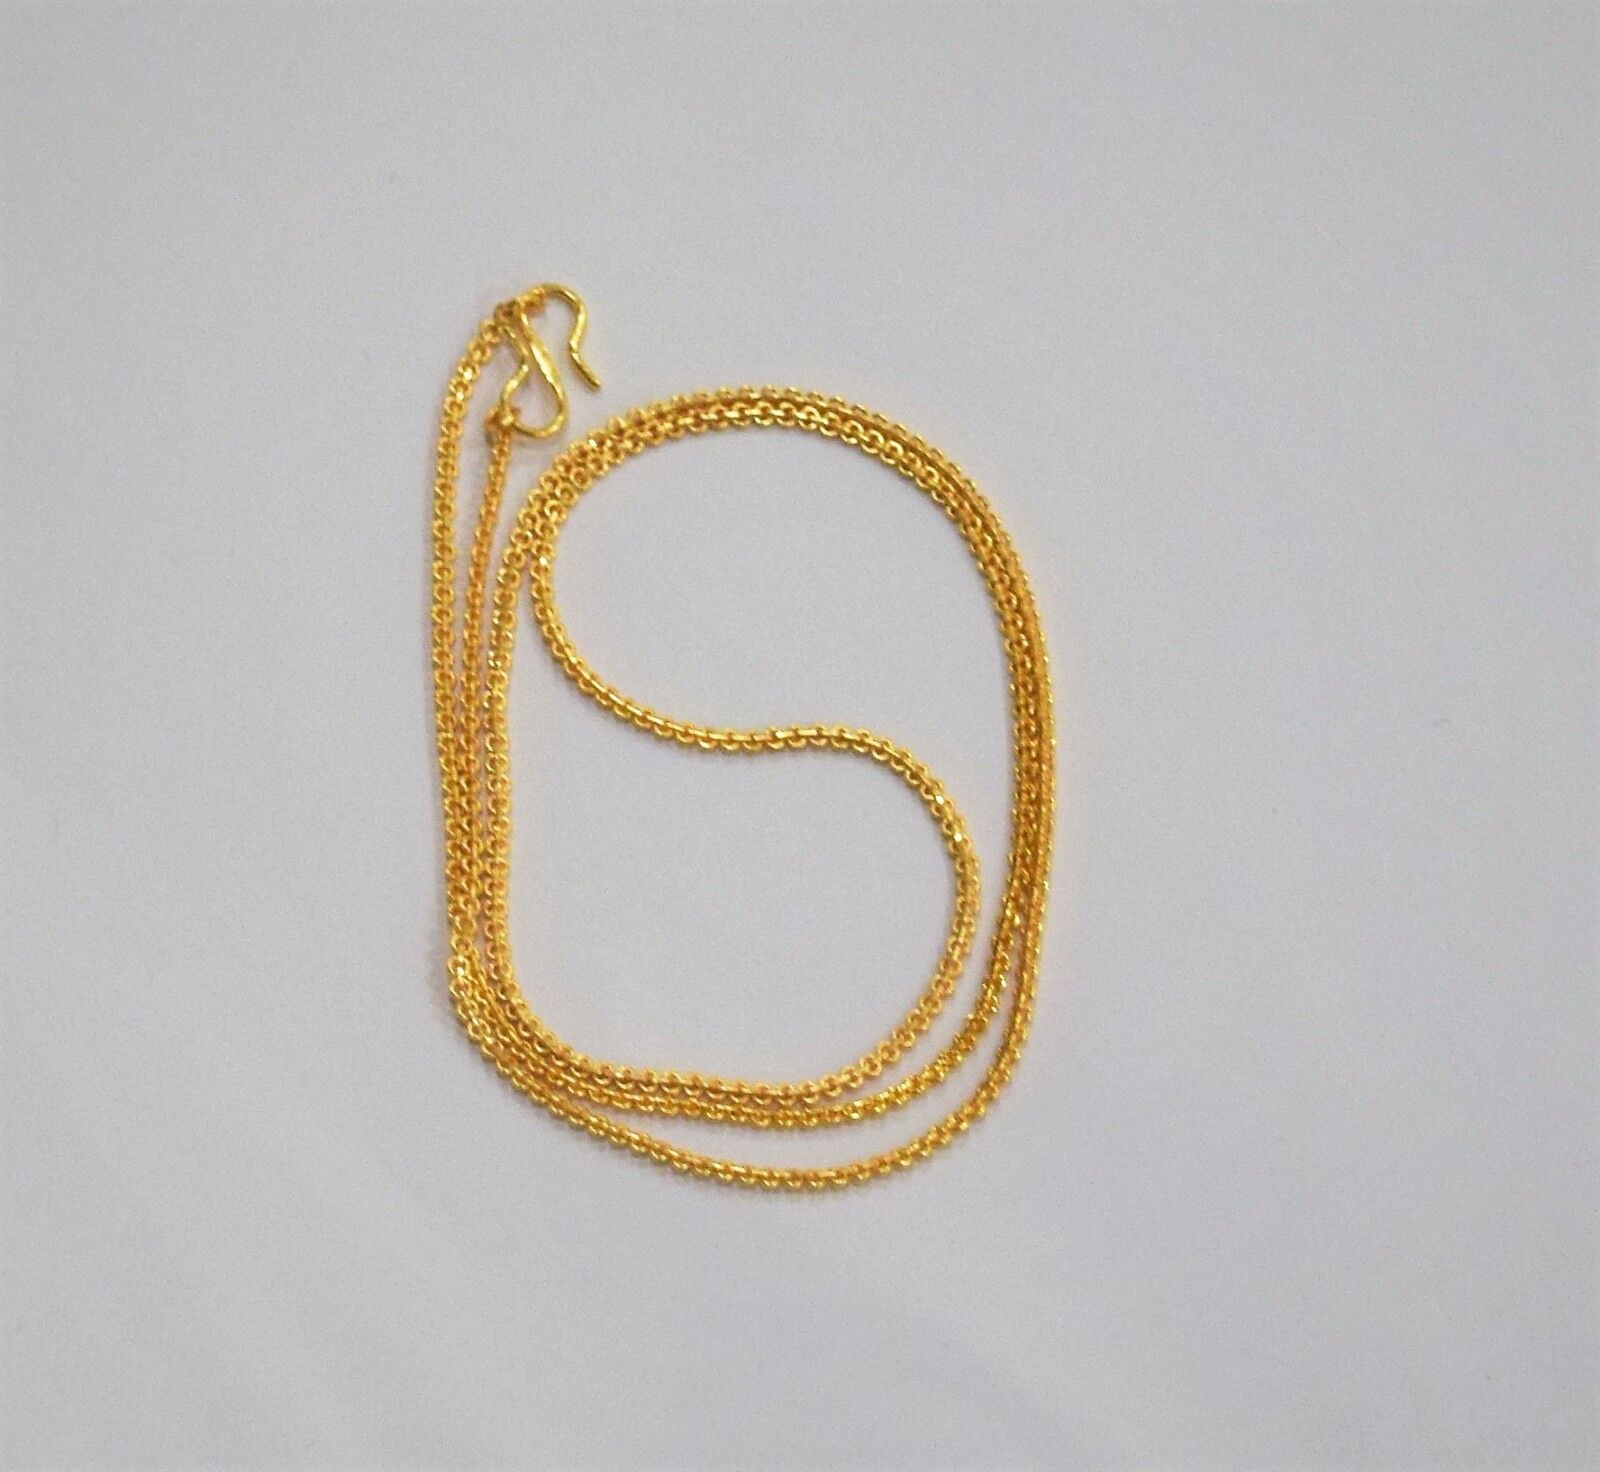 11 pcs 14K Gold Plated Link Chain 22" Brand New Без бренда